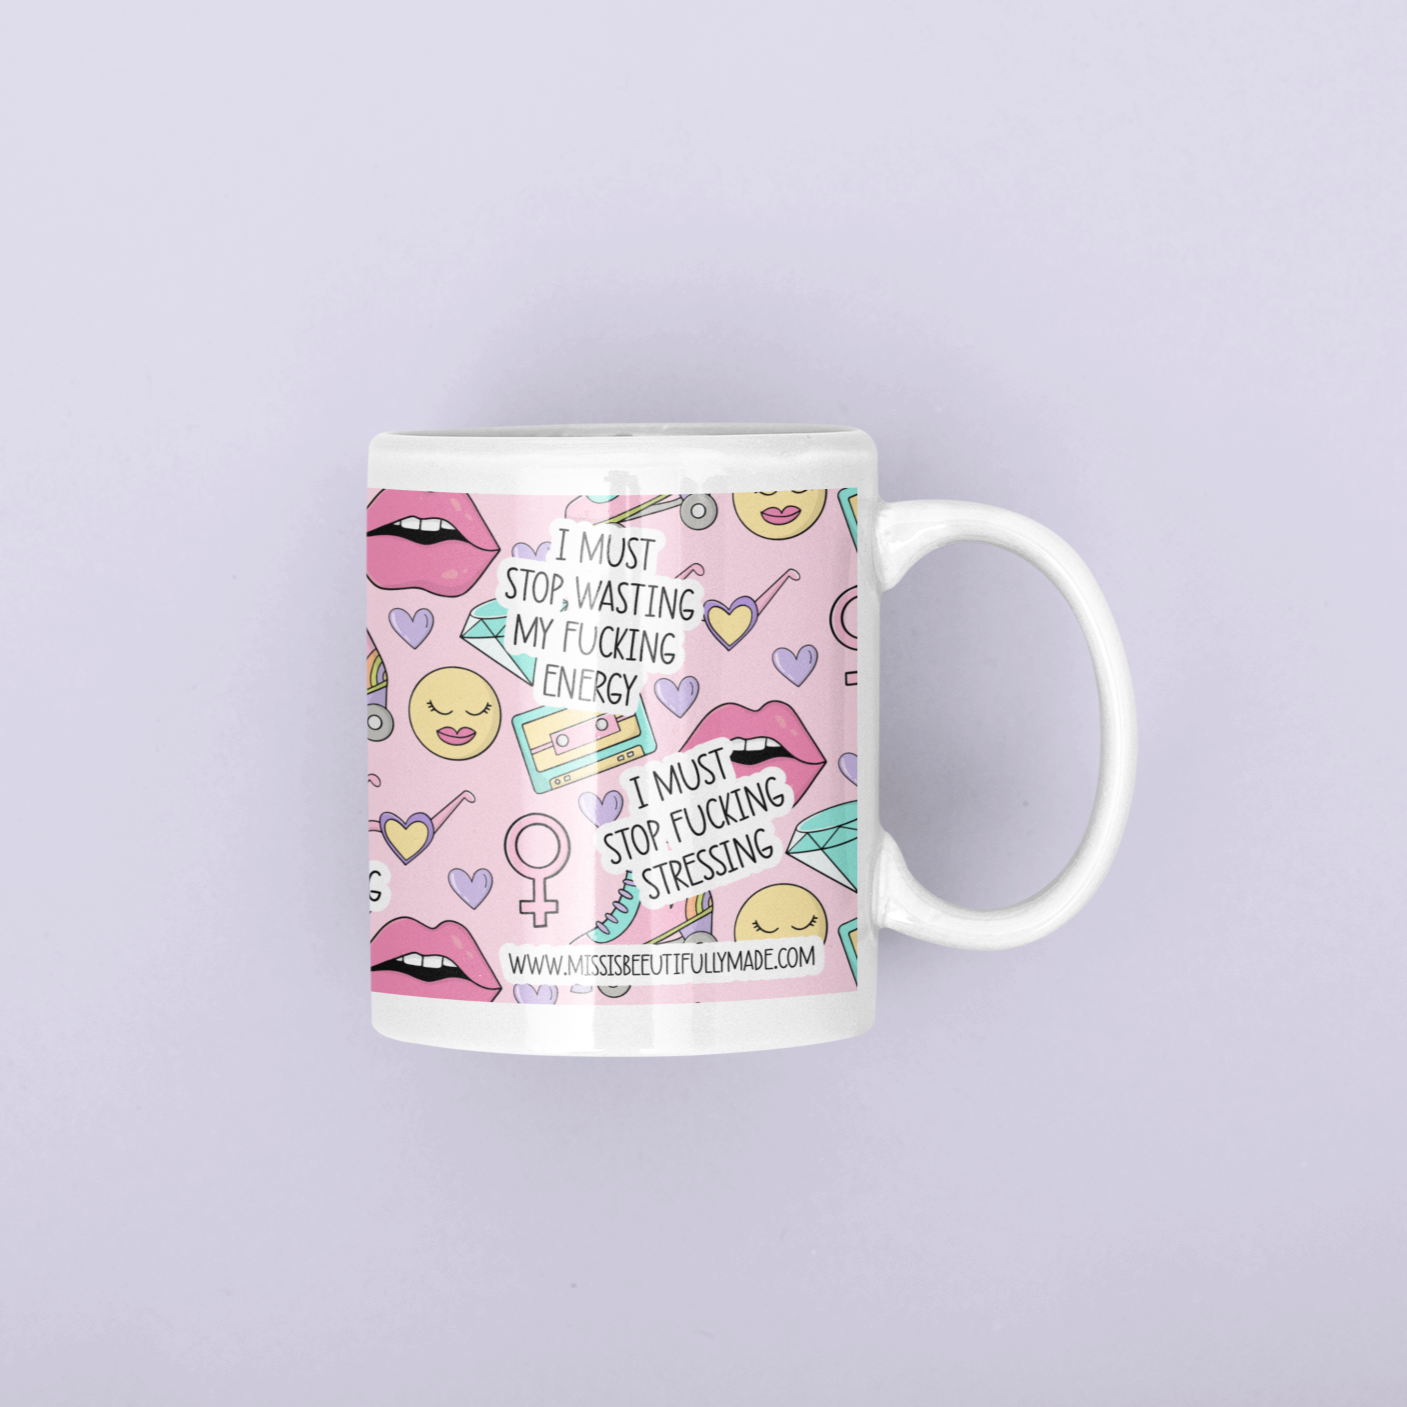 White ceramic mug with a pink printed retro design. Funny I must affirmation quotes are printed around the whole mug i.e I must continue to fucking swear and i must tell more people to fuck off.